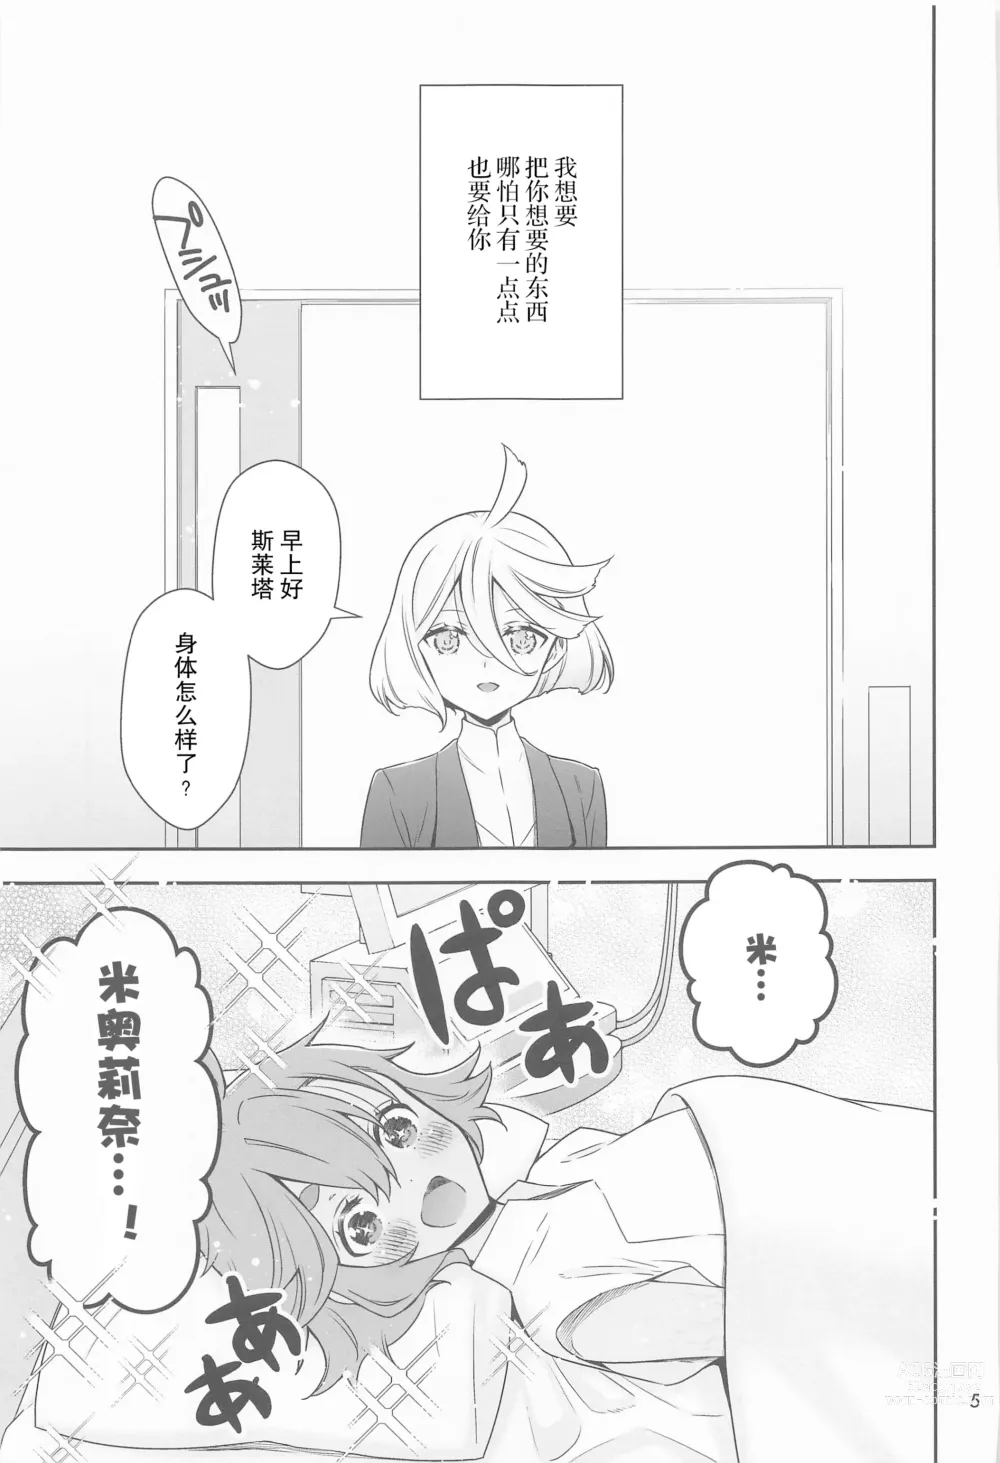 Page 5 of doujinshi 祝福之日